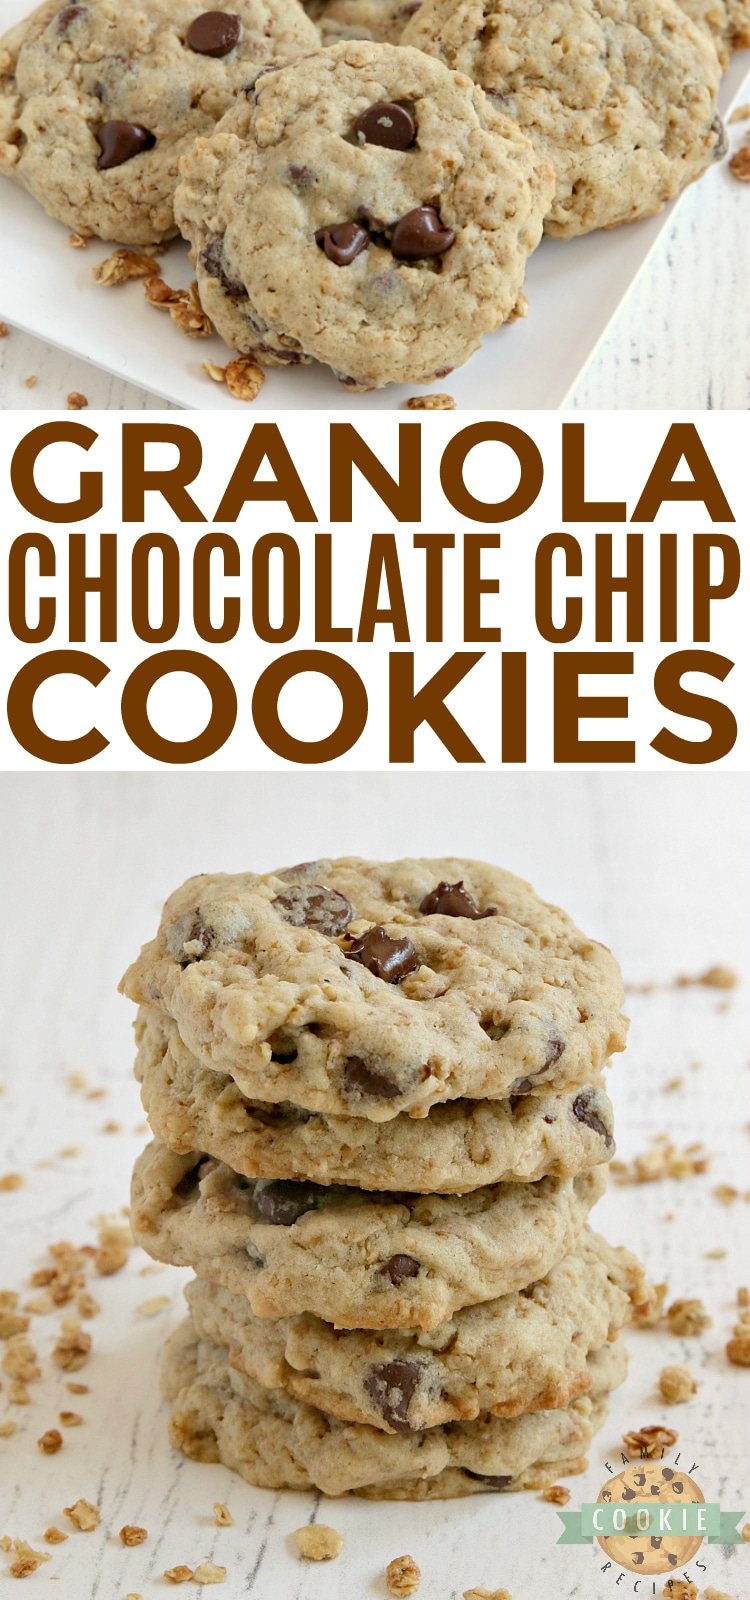 Granola Chocolate Chip Cookies are soft, chewy, full of protein and crunchy granola. With 5 grams of protein per cookie and a little bit of crunch, these have become my new favorite cookie! via @buttergirls